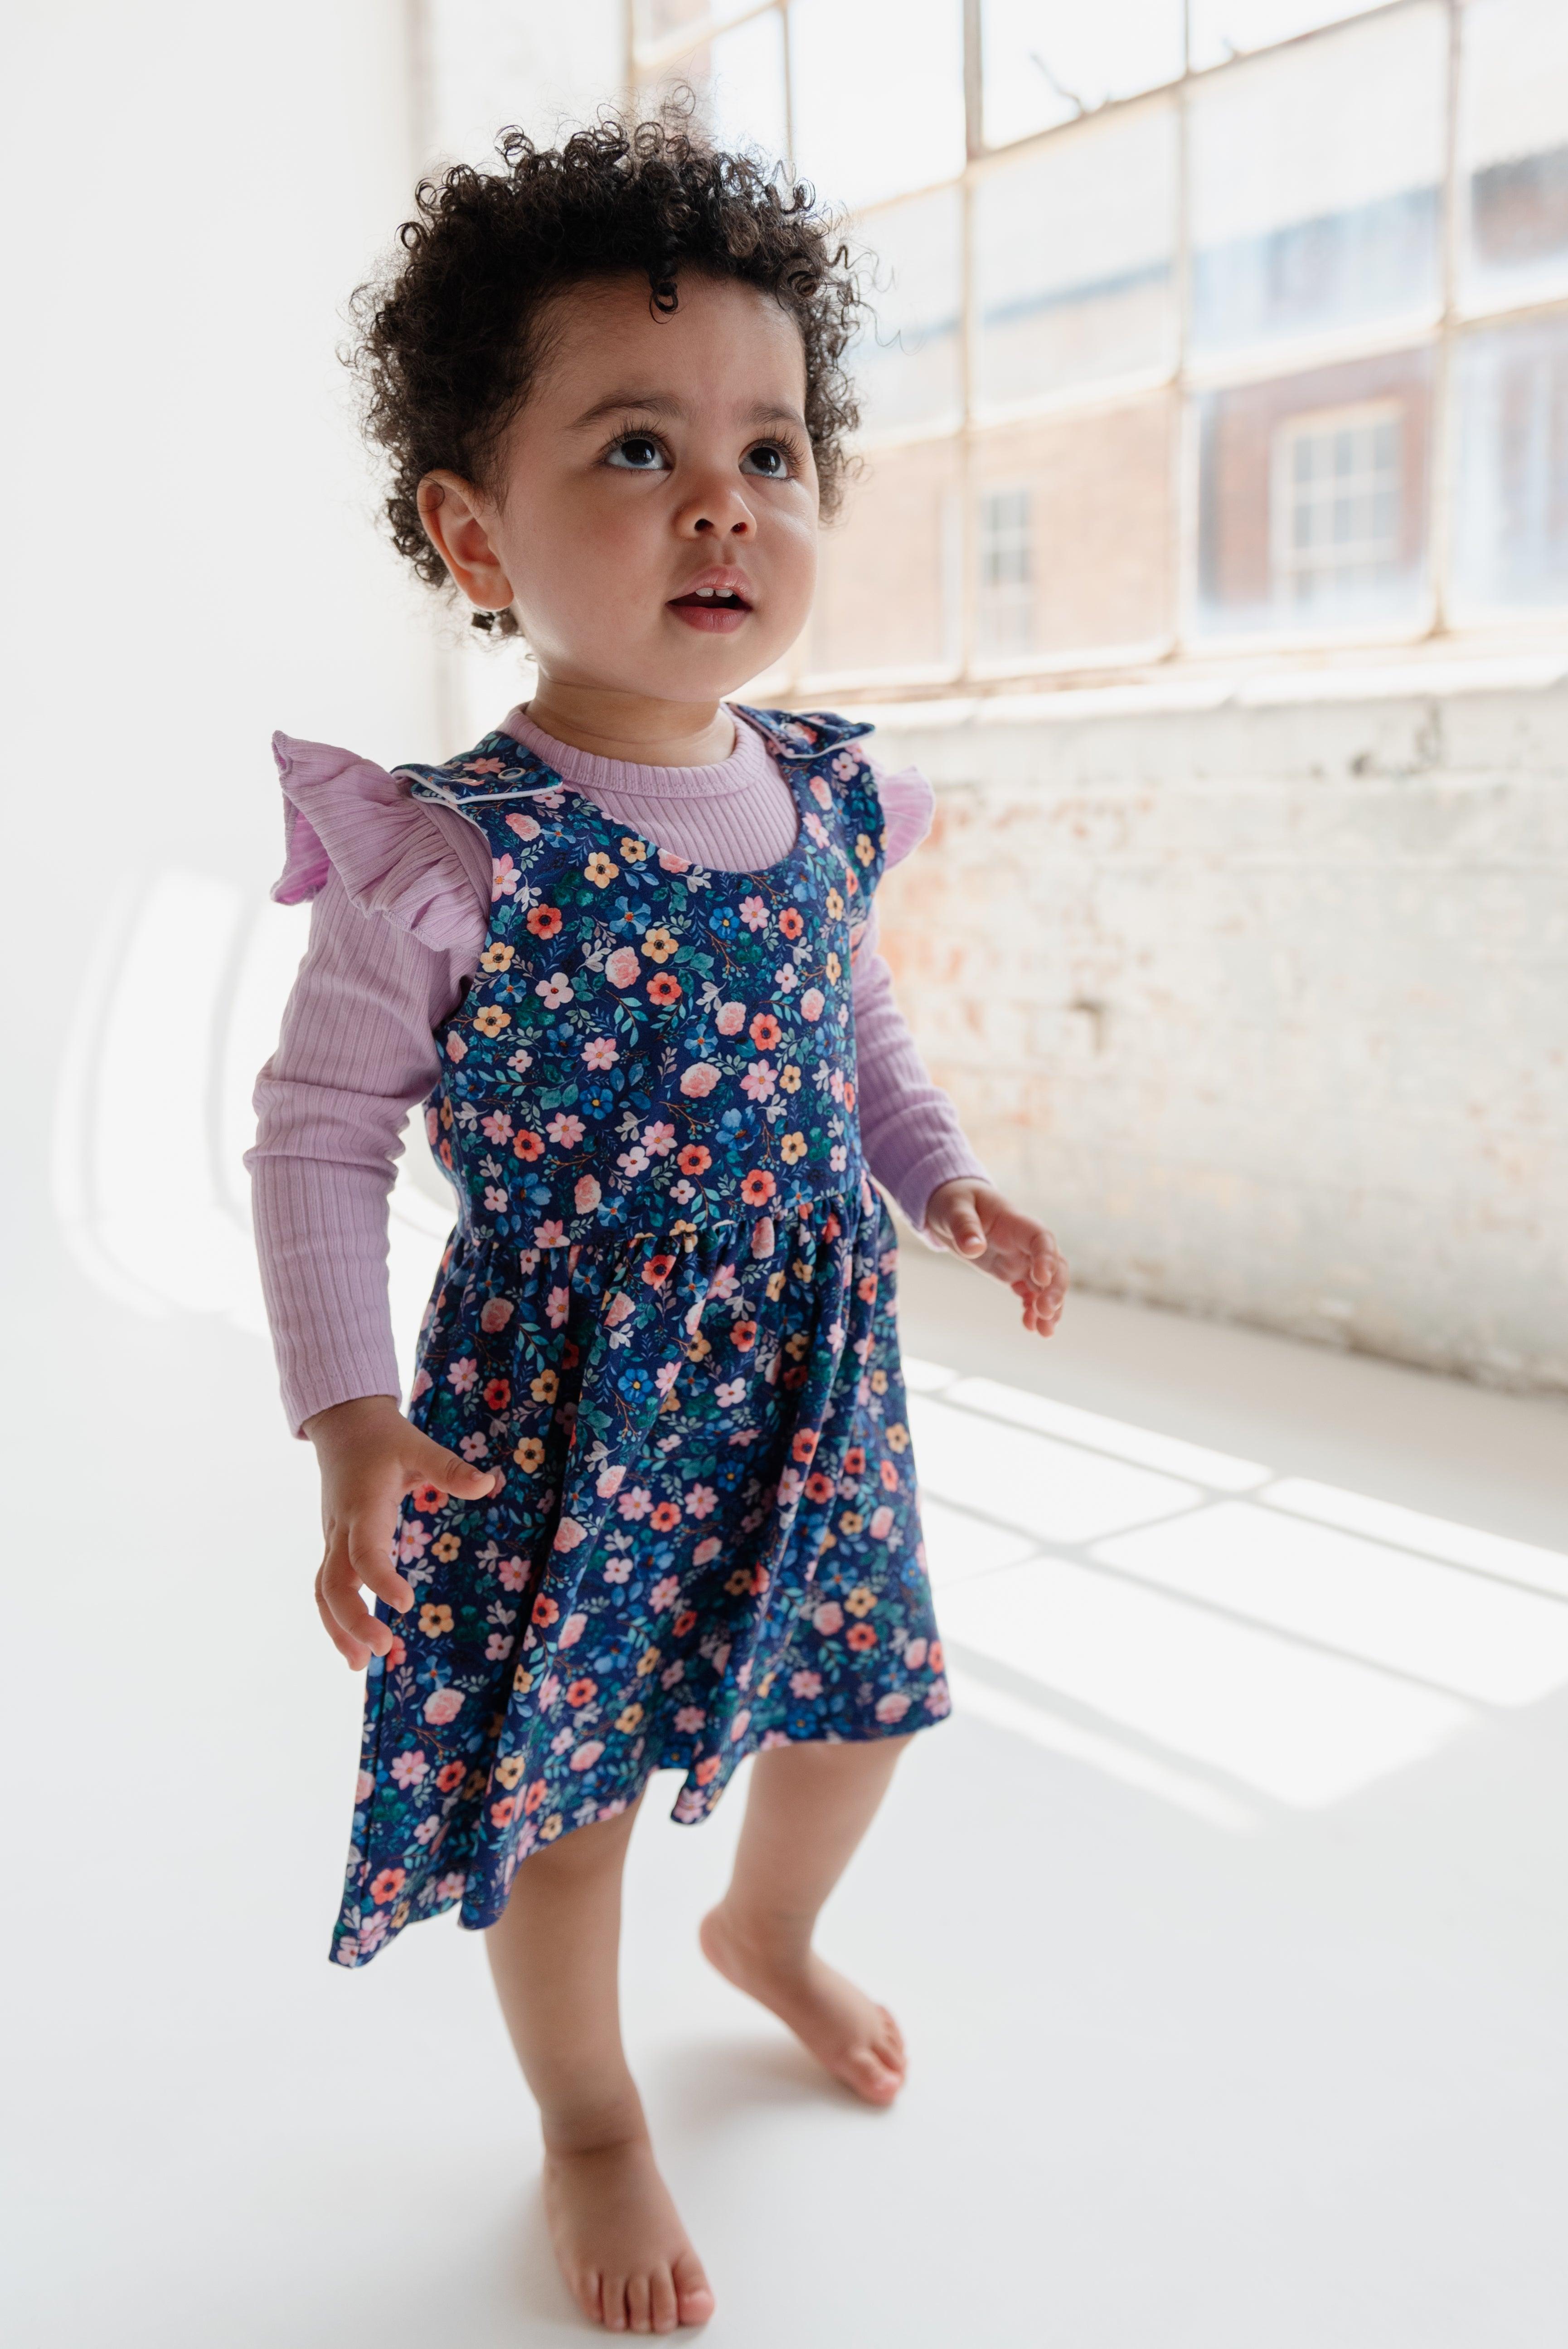 files/navy-dainty-floral-dress-claybearofficial-7.jpg